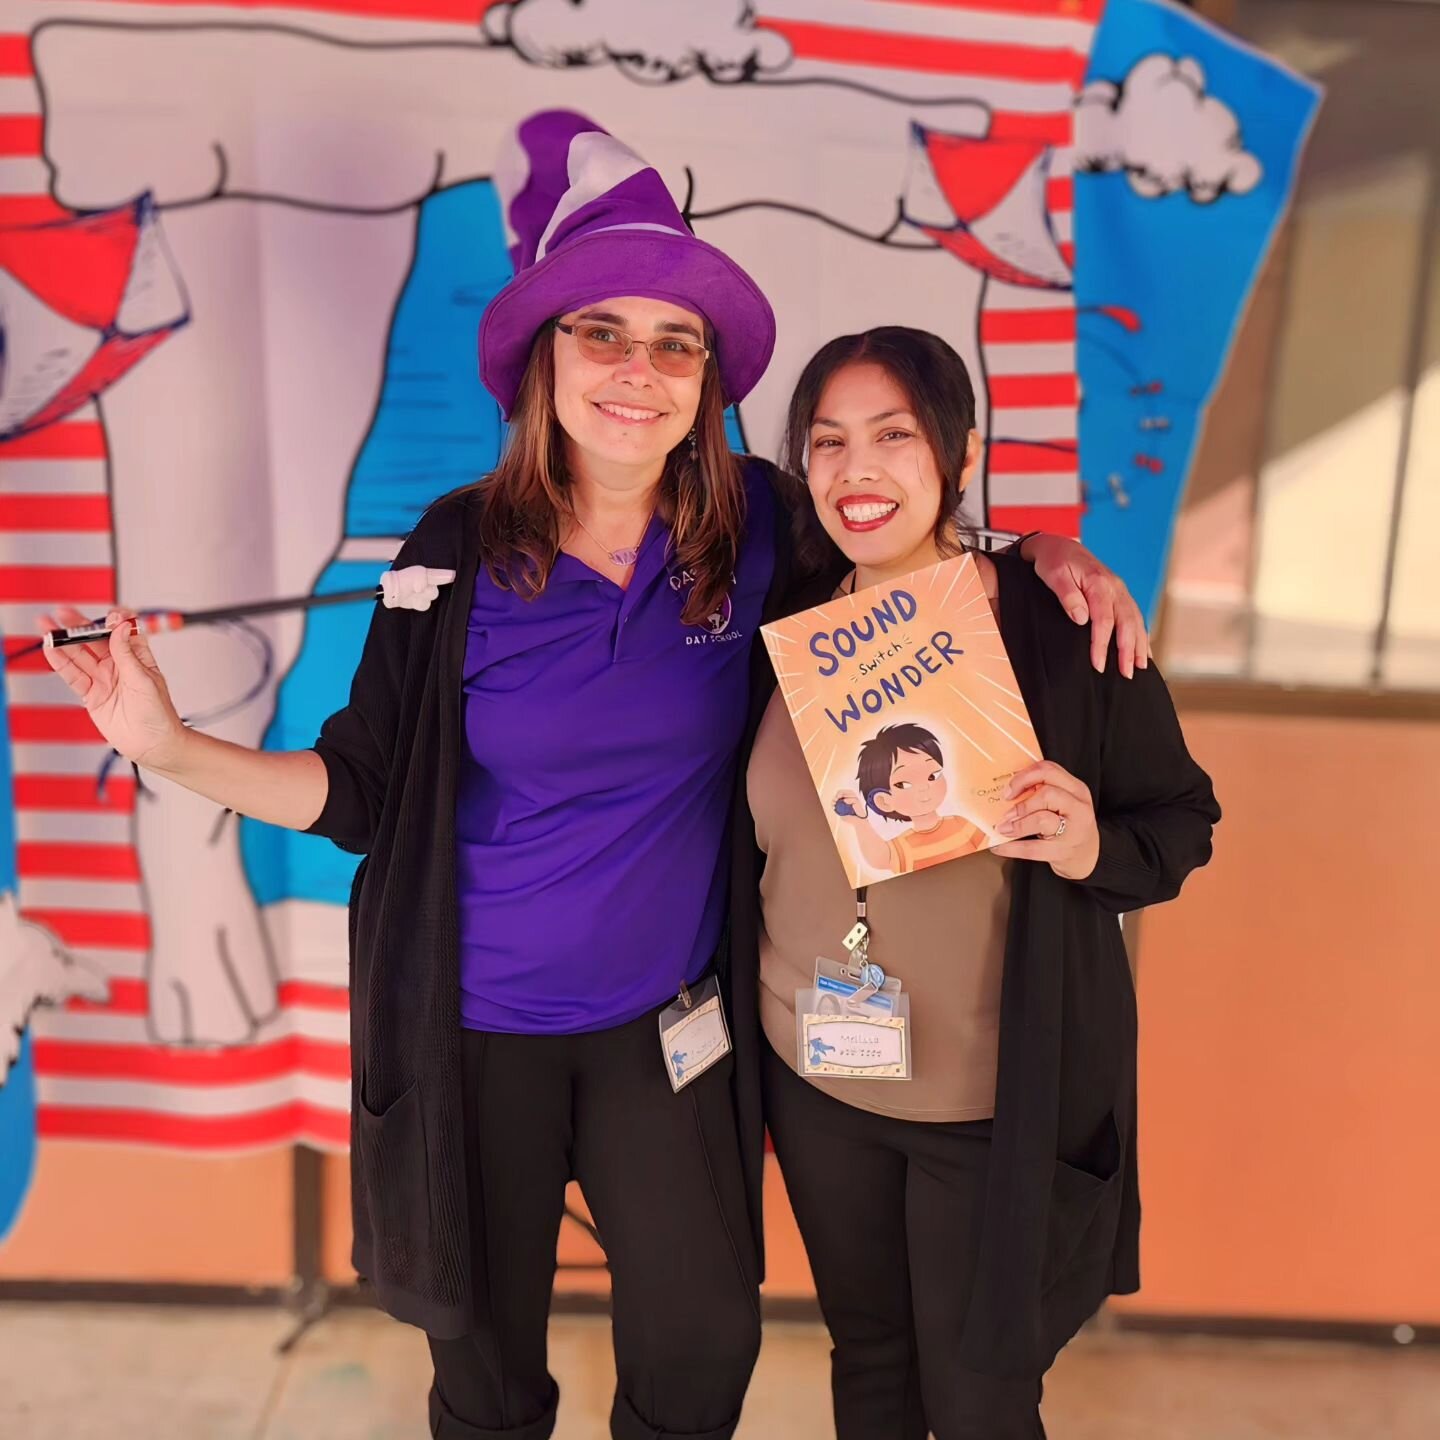 Read Across America at Davila Day School was the perfect way to end the week! What a great way to start the weekend! #southcountySELPA #daviladayschool #equityanddesign #weareedandd #readacrossamerica